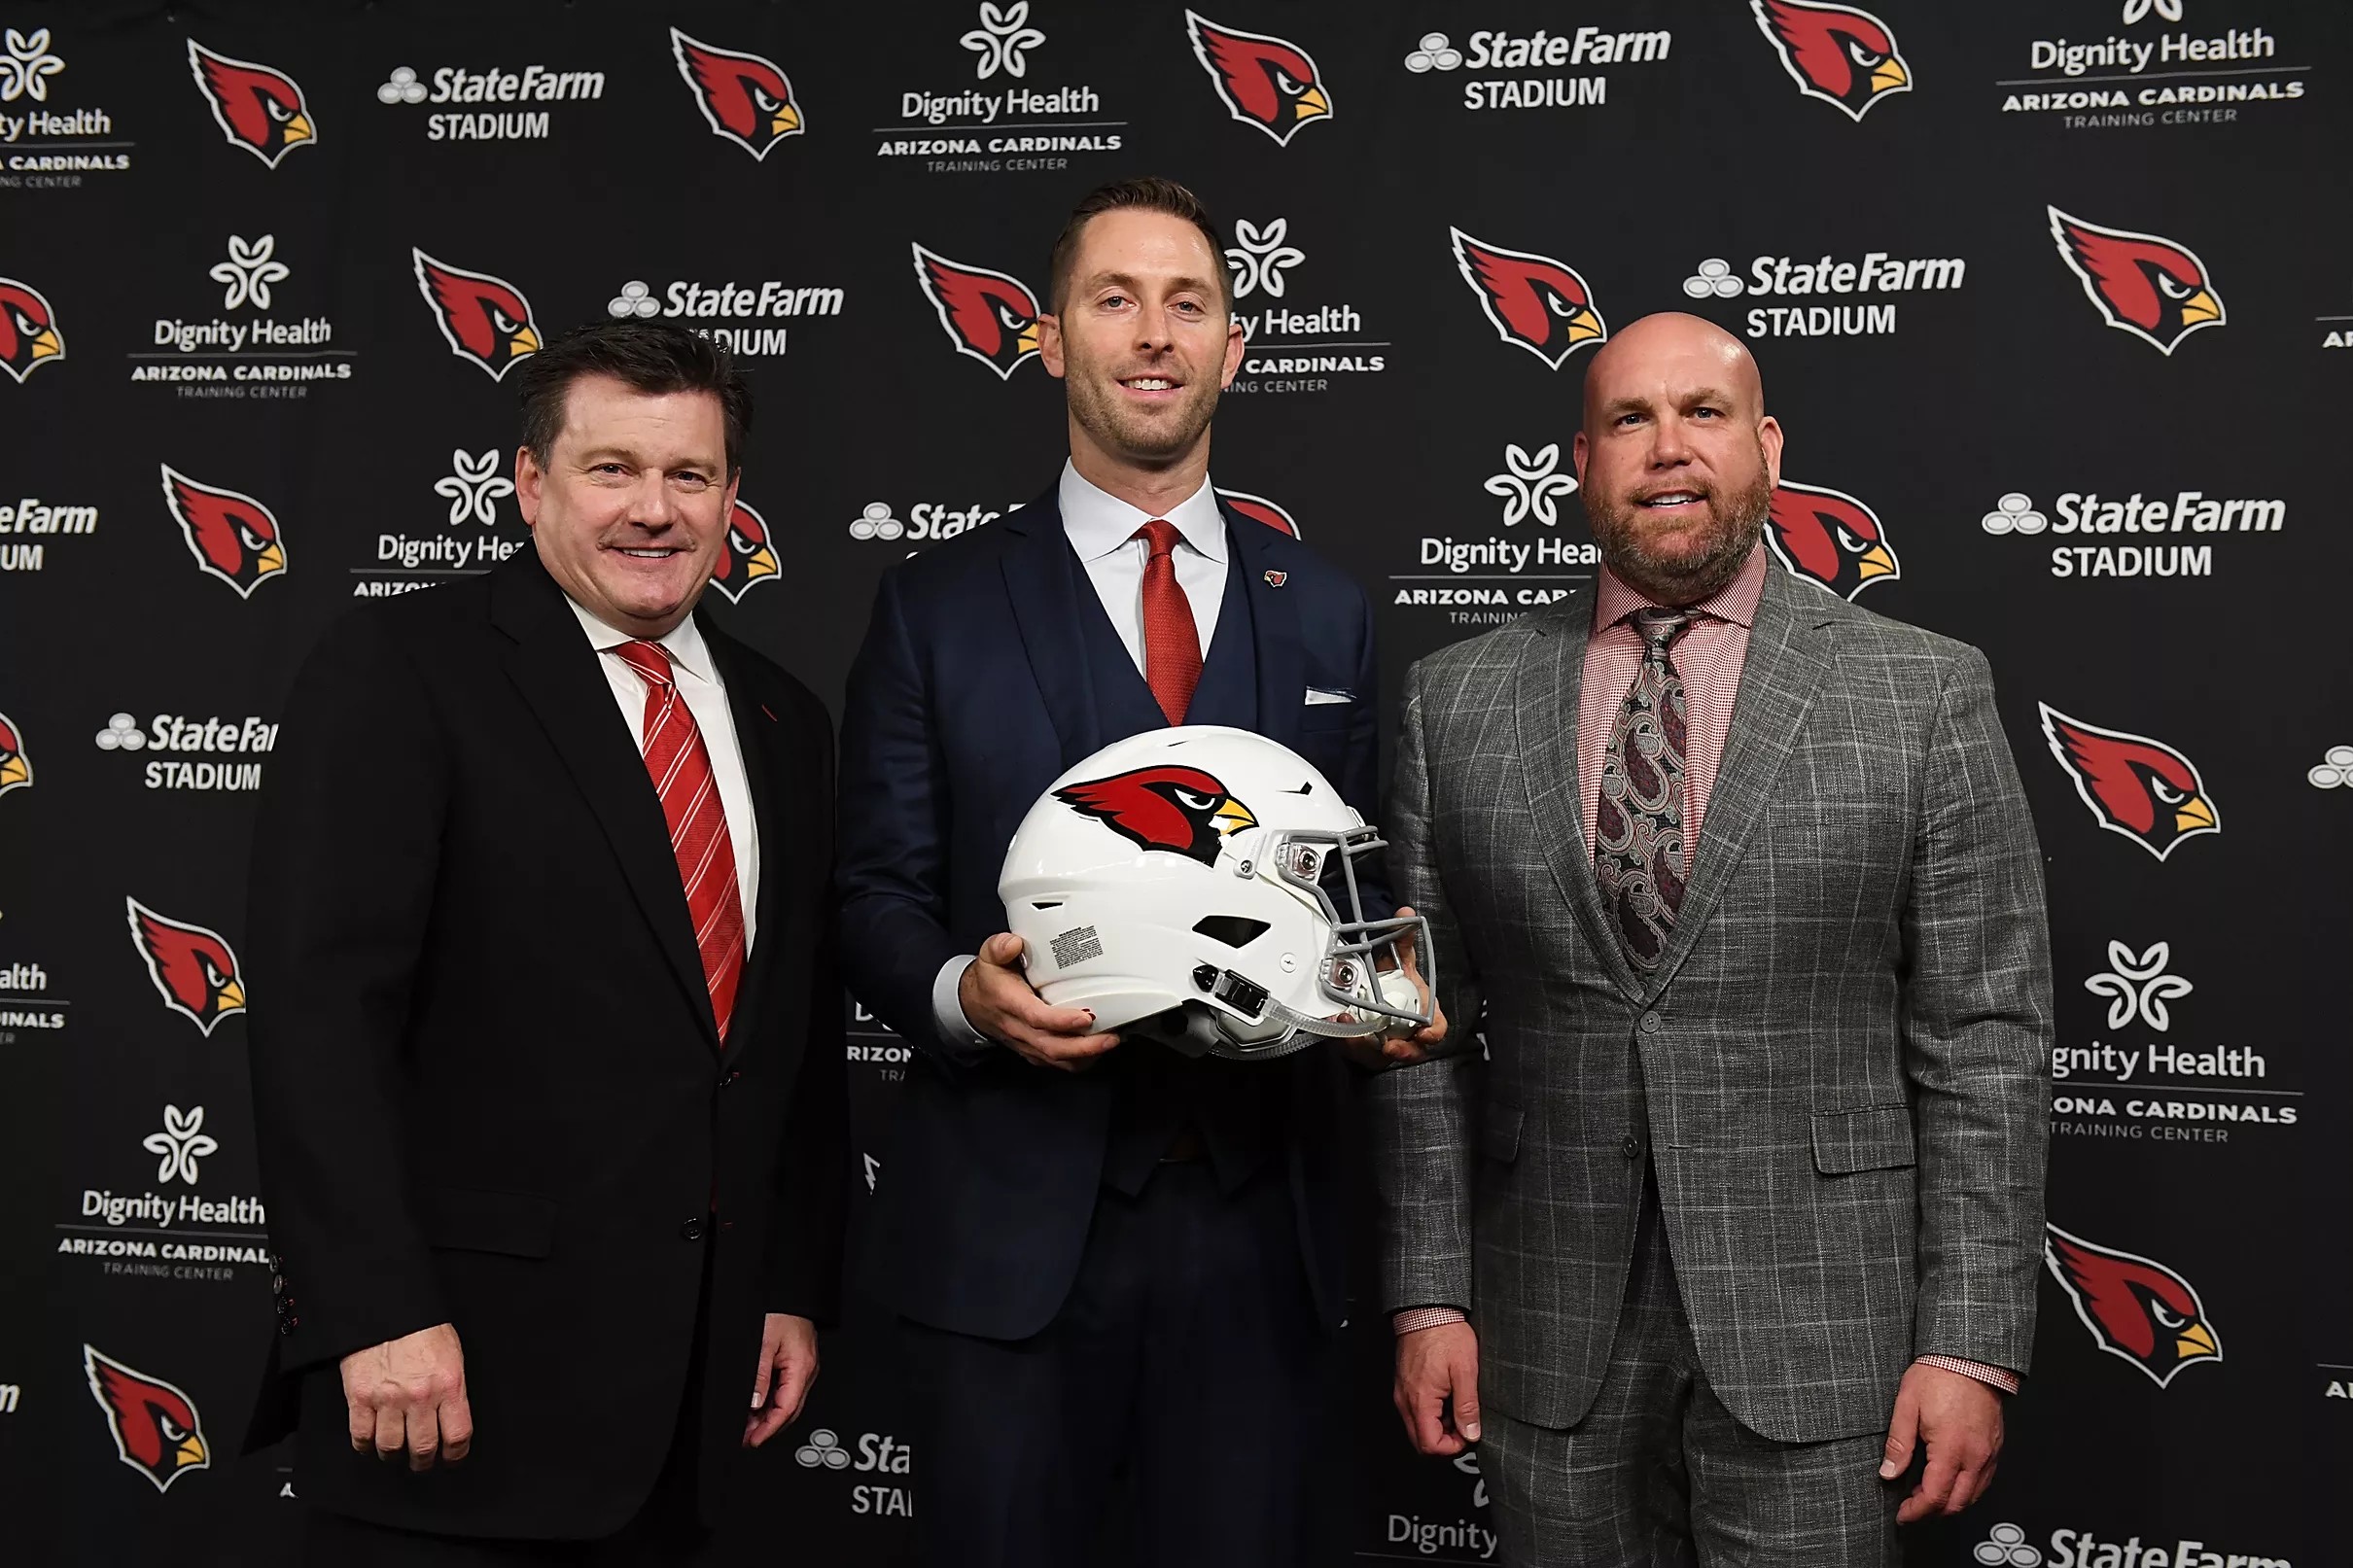 Arizona Cardinals projected to improve by two wins, still pick first in